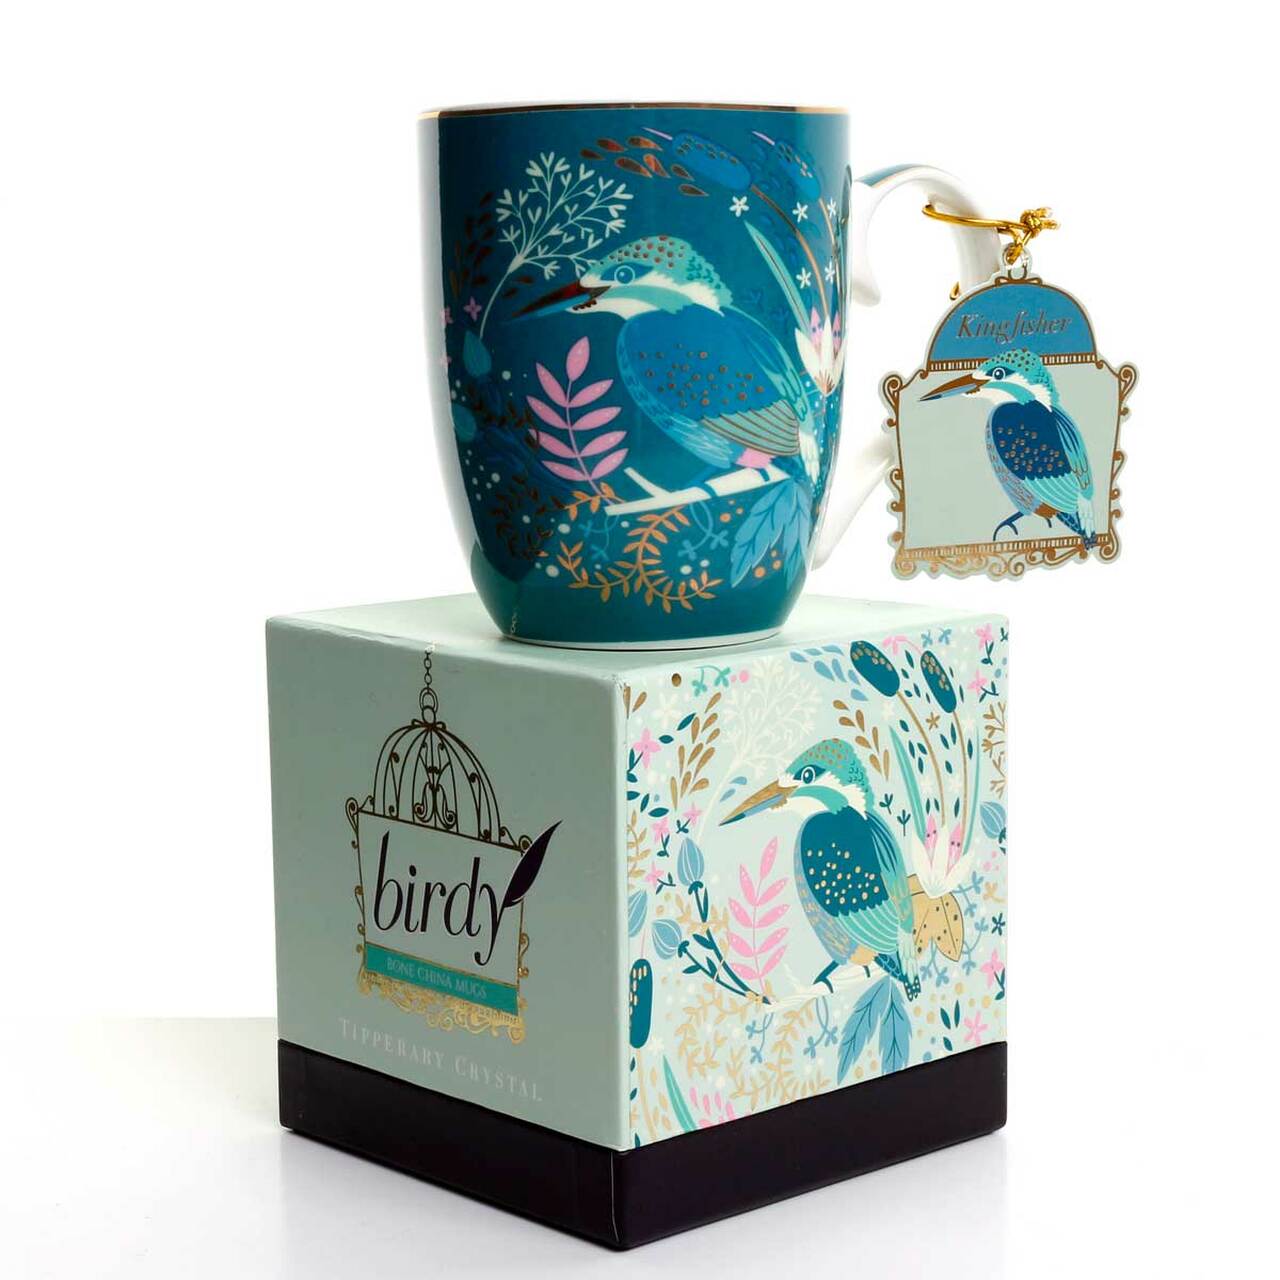 Tipperary Crystal Kingfisher Single Birdy Mug  New to our collection, these individual mugs come beautifully illustrated and presented in a rigid Tipperary Crystal gift box. Makes a wonderful gift to be enjoyed over a peaceful cup of their favourite beverage.